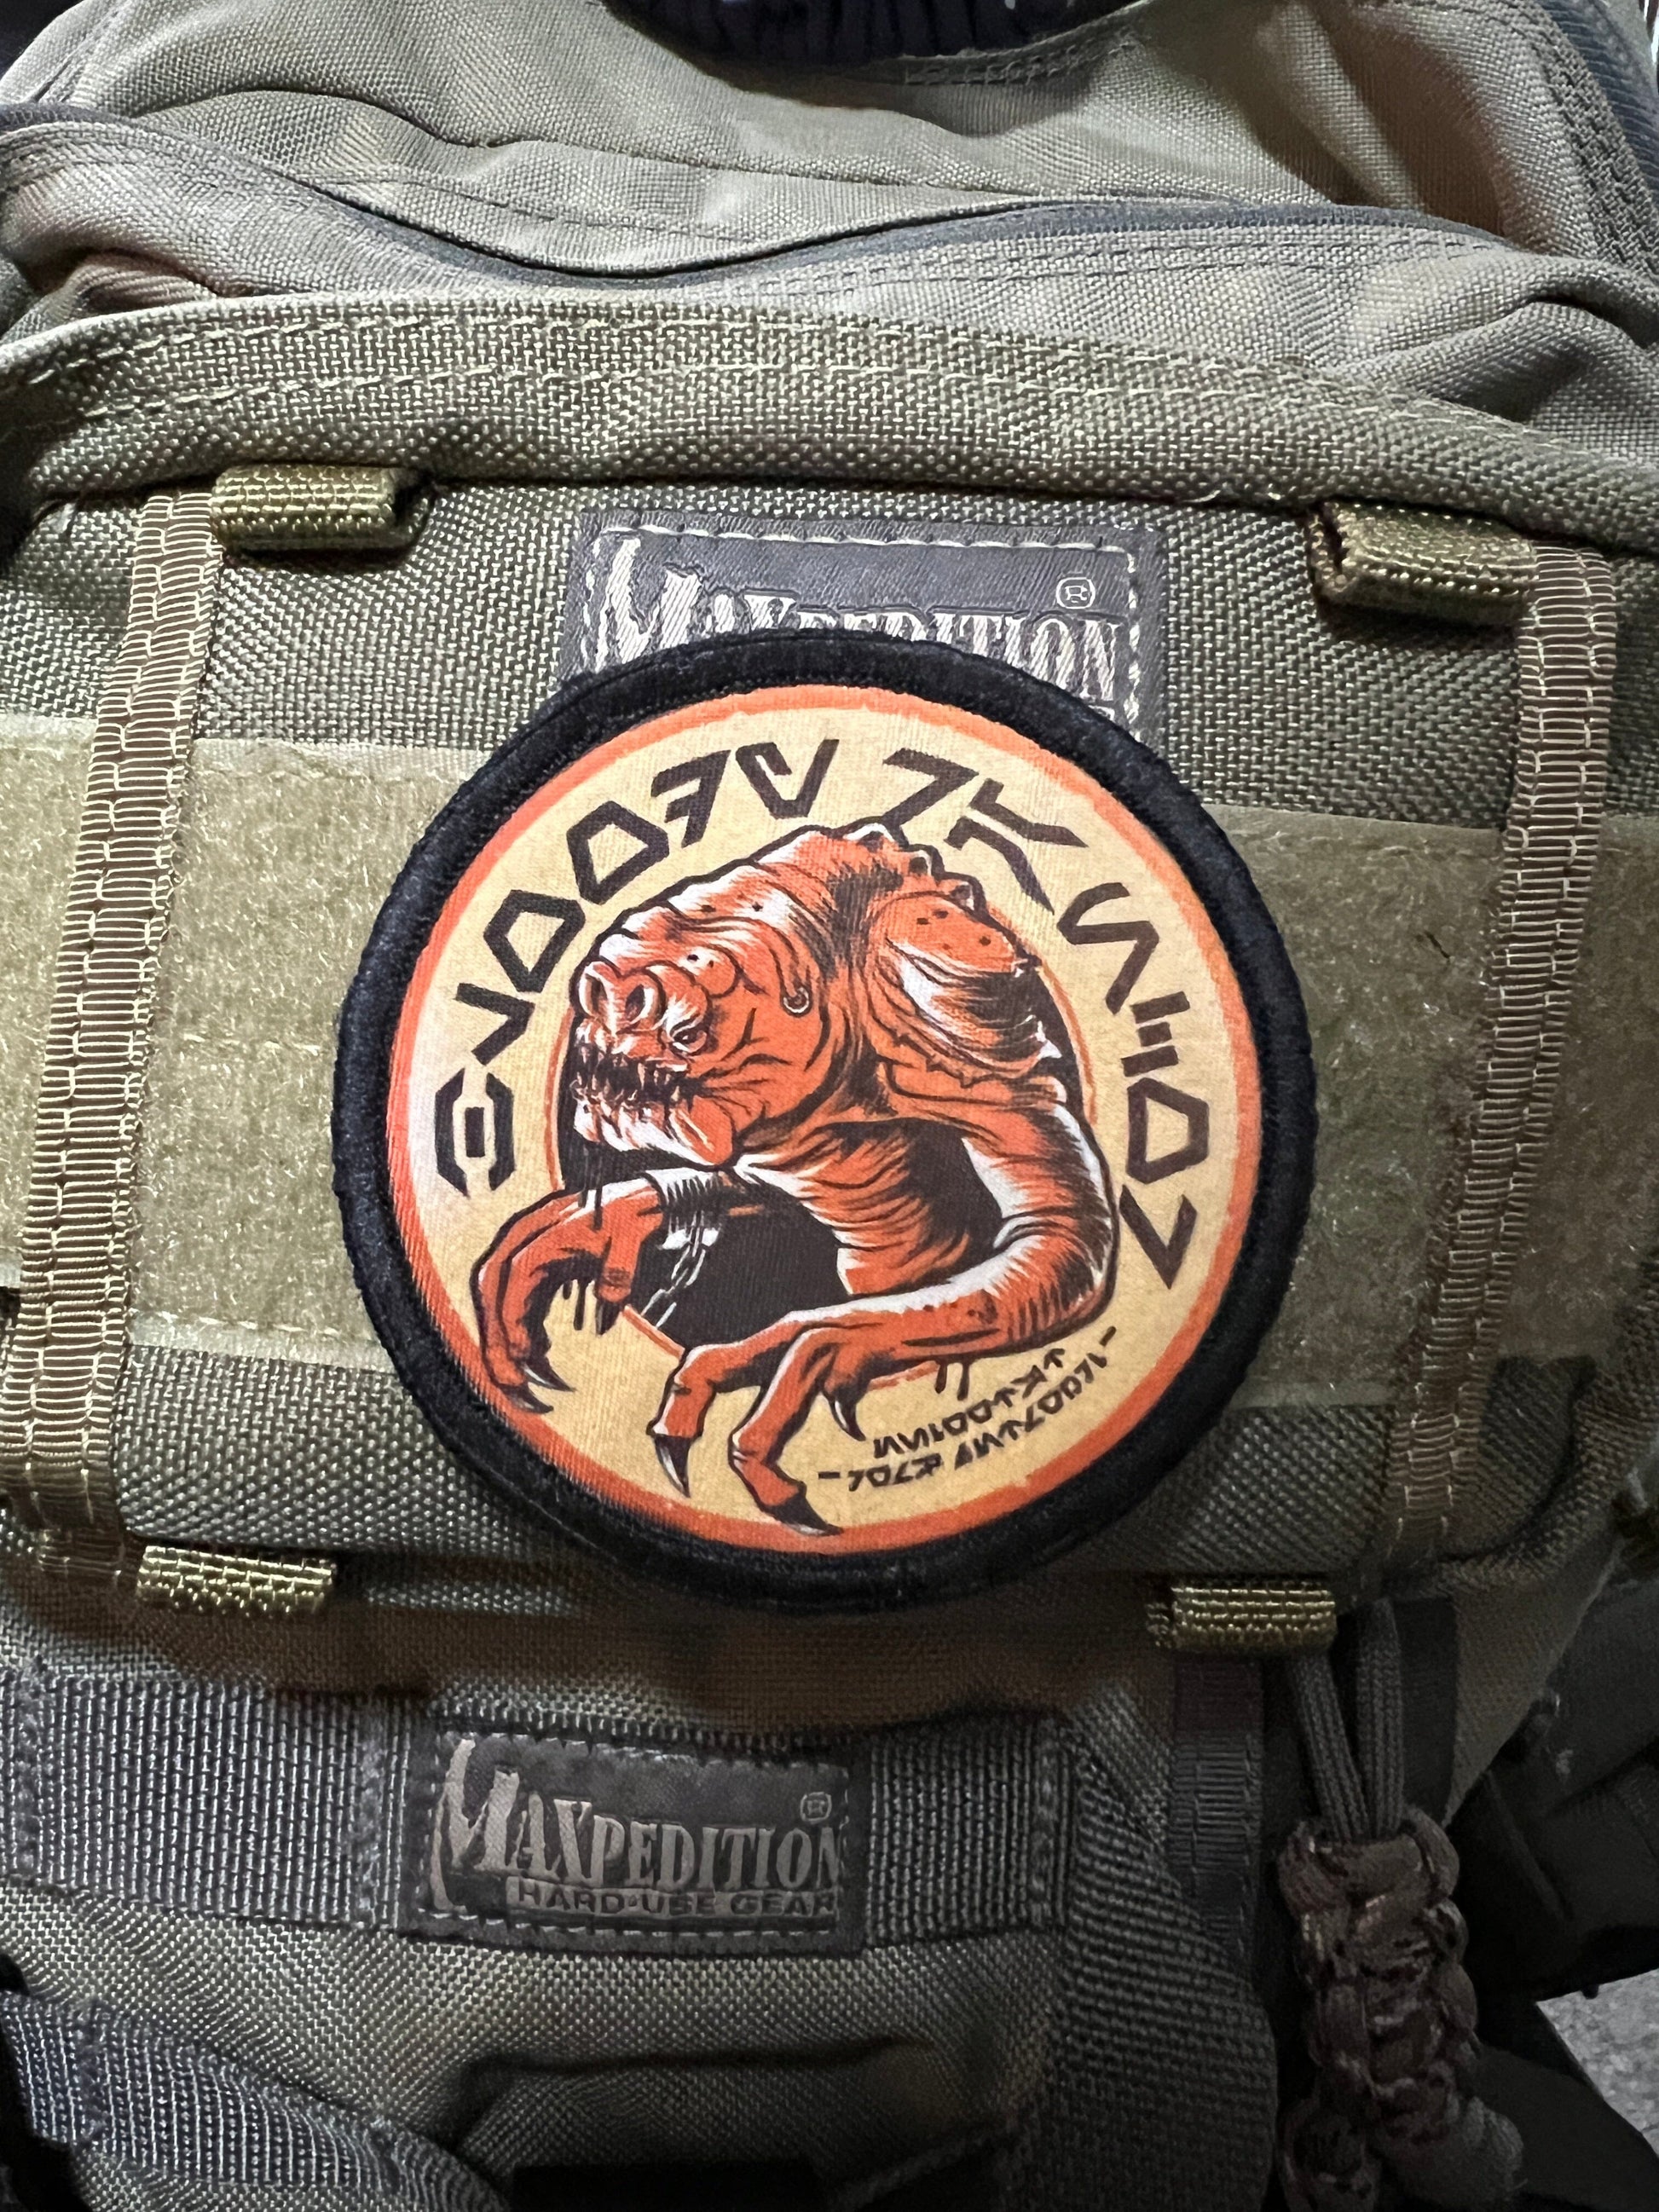 Oga's Cantina RANCOR Coaster Veclro Morale Patch Morale Patches Redheaded T Shirts 